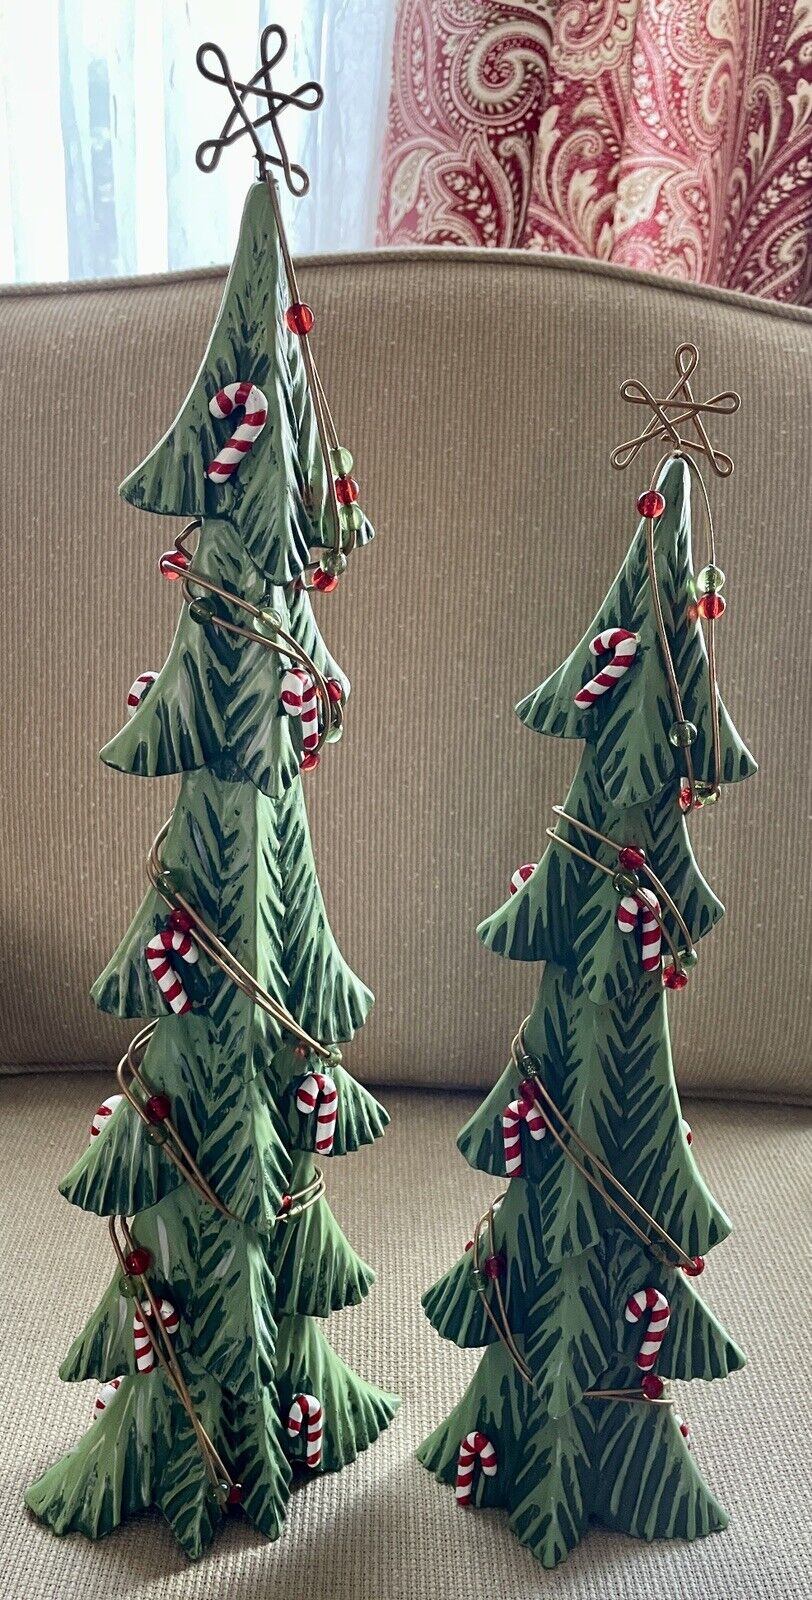 (2) Fitz and Floyd Christmas Trees From Adventures w/Santa Collection 2014